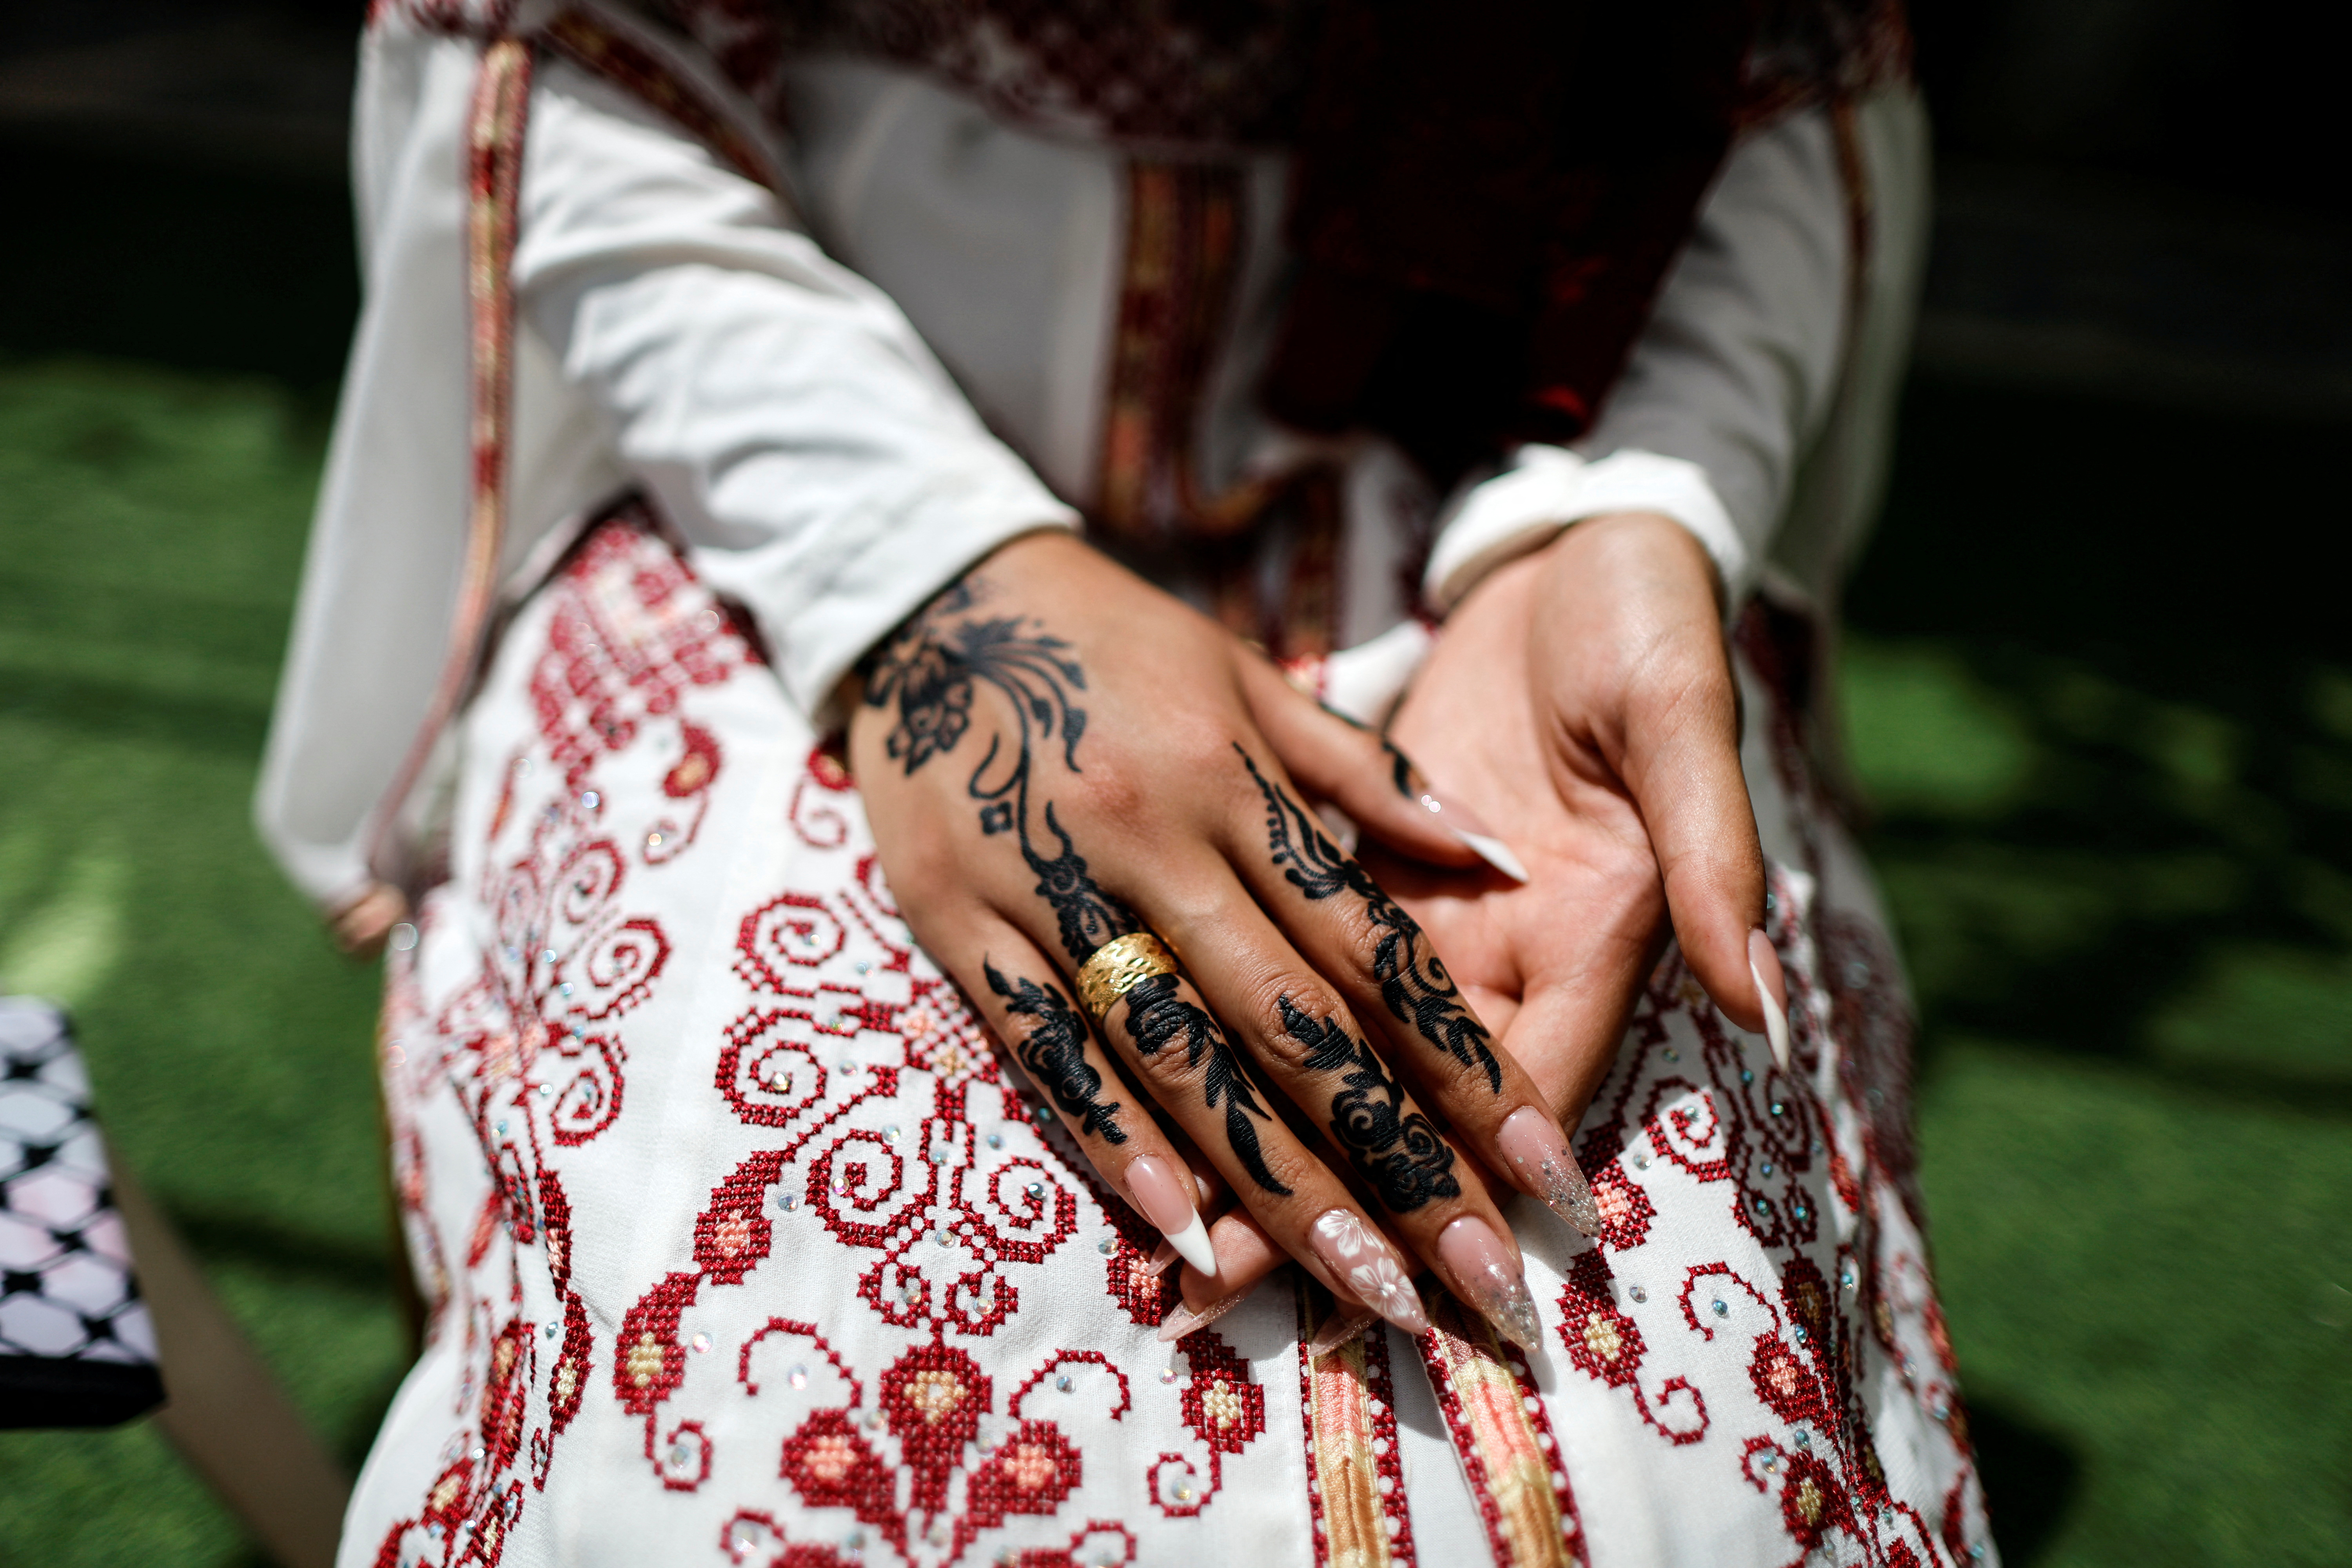 The hands of a Palestinian bride Rabeha Al-Rajabi is decorated with Henna for her wedding ceremony in her house in East Jerusalem